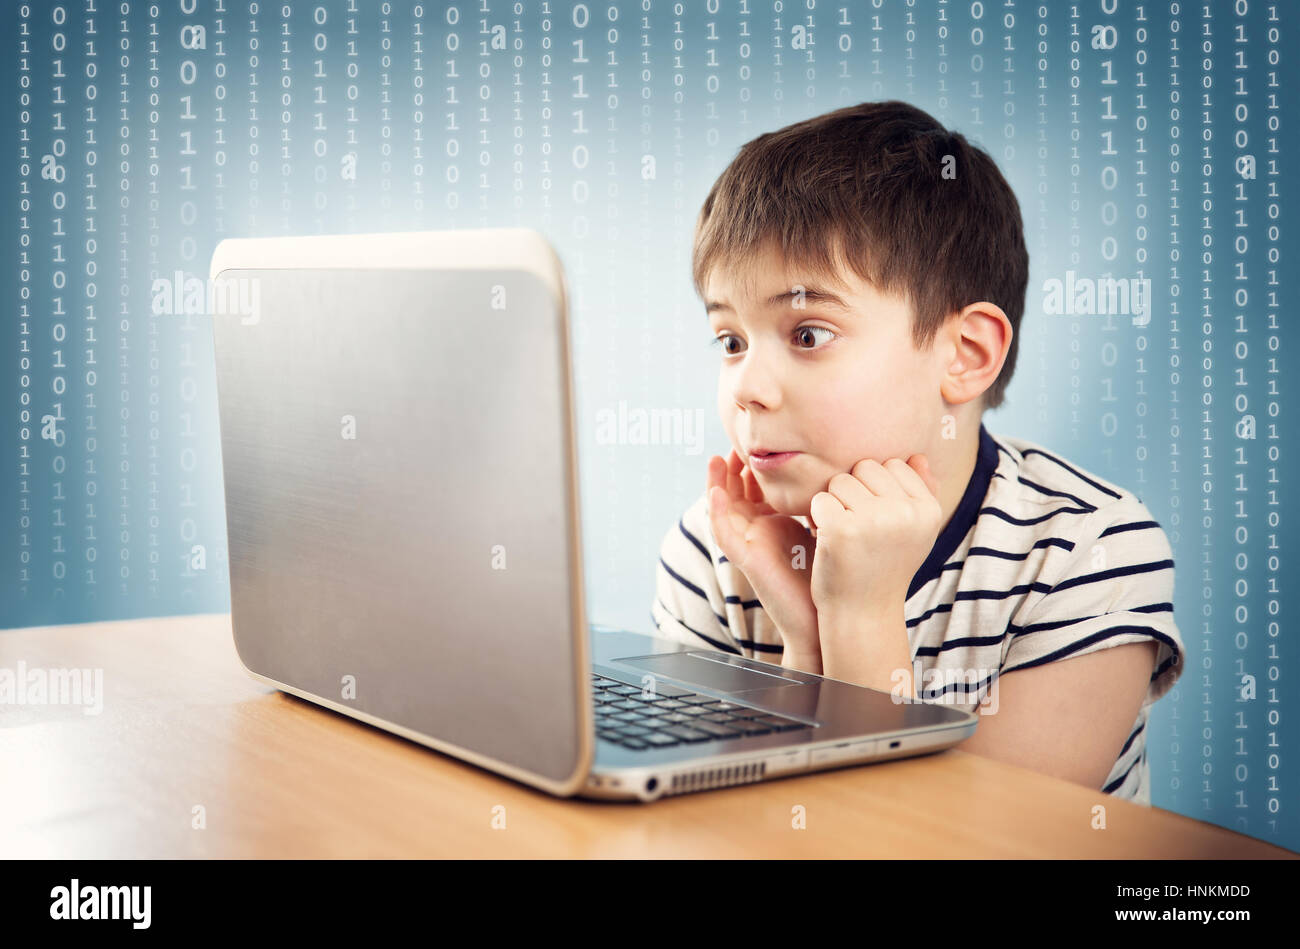 seven years old child sitting with a laptop Stock Photo